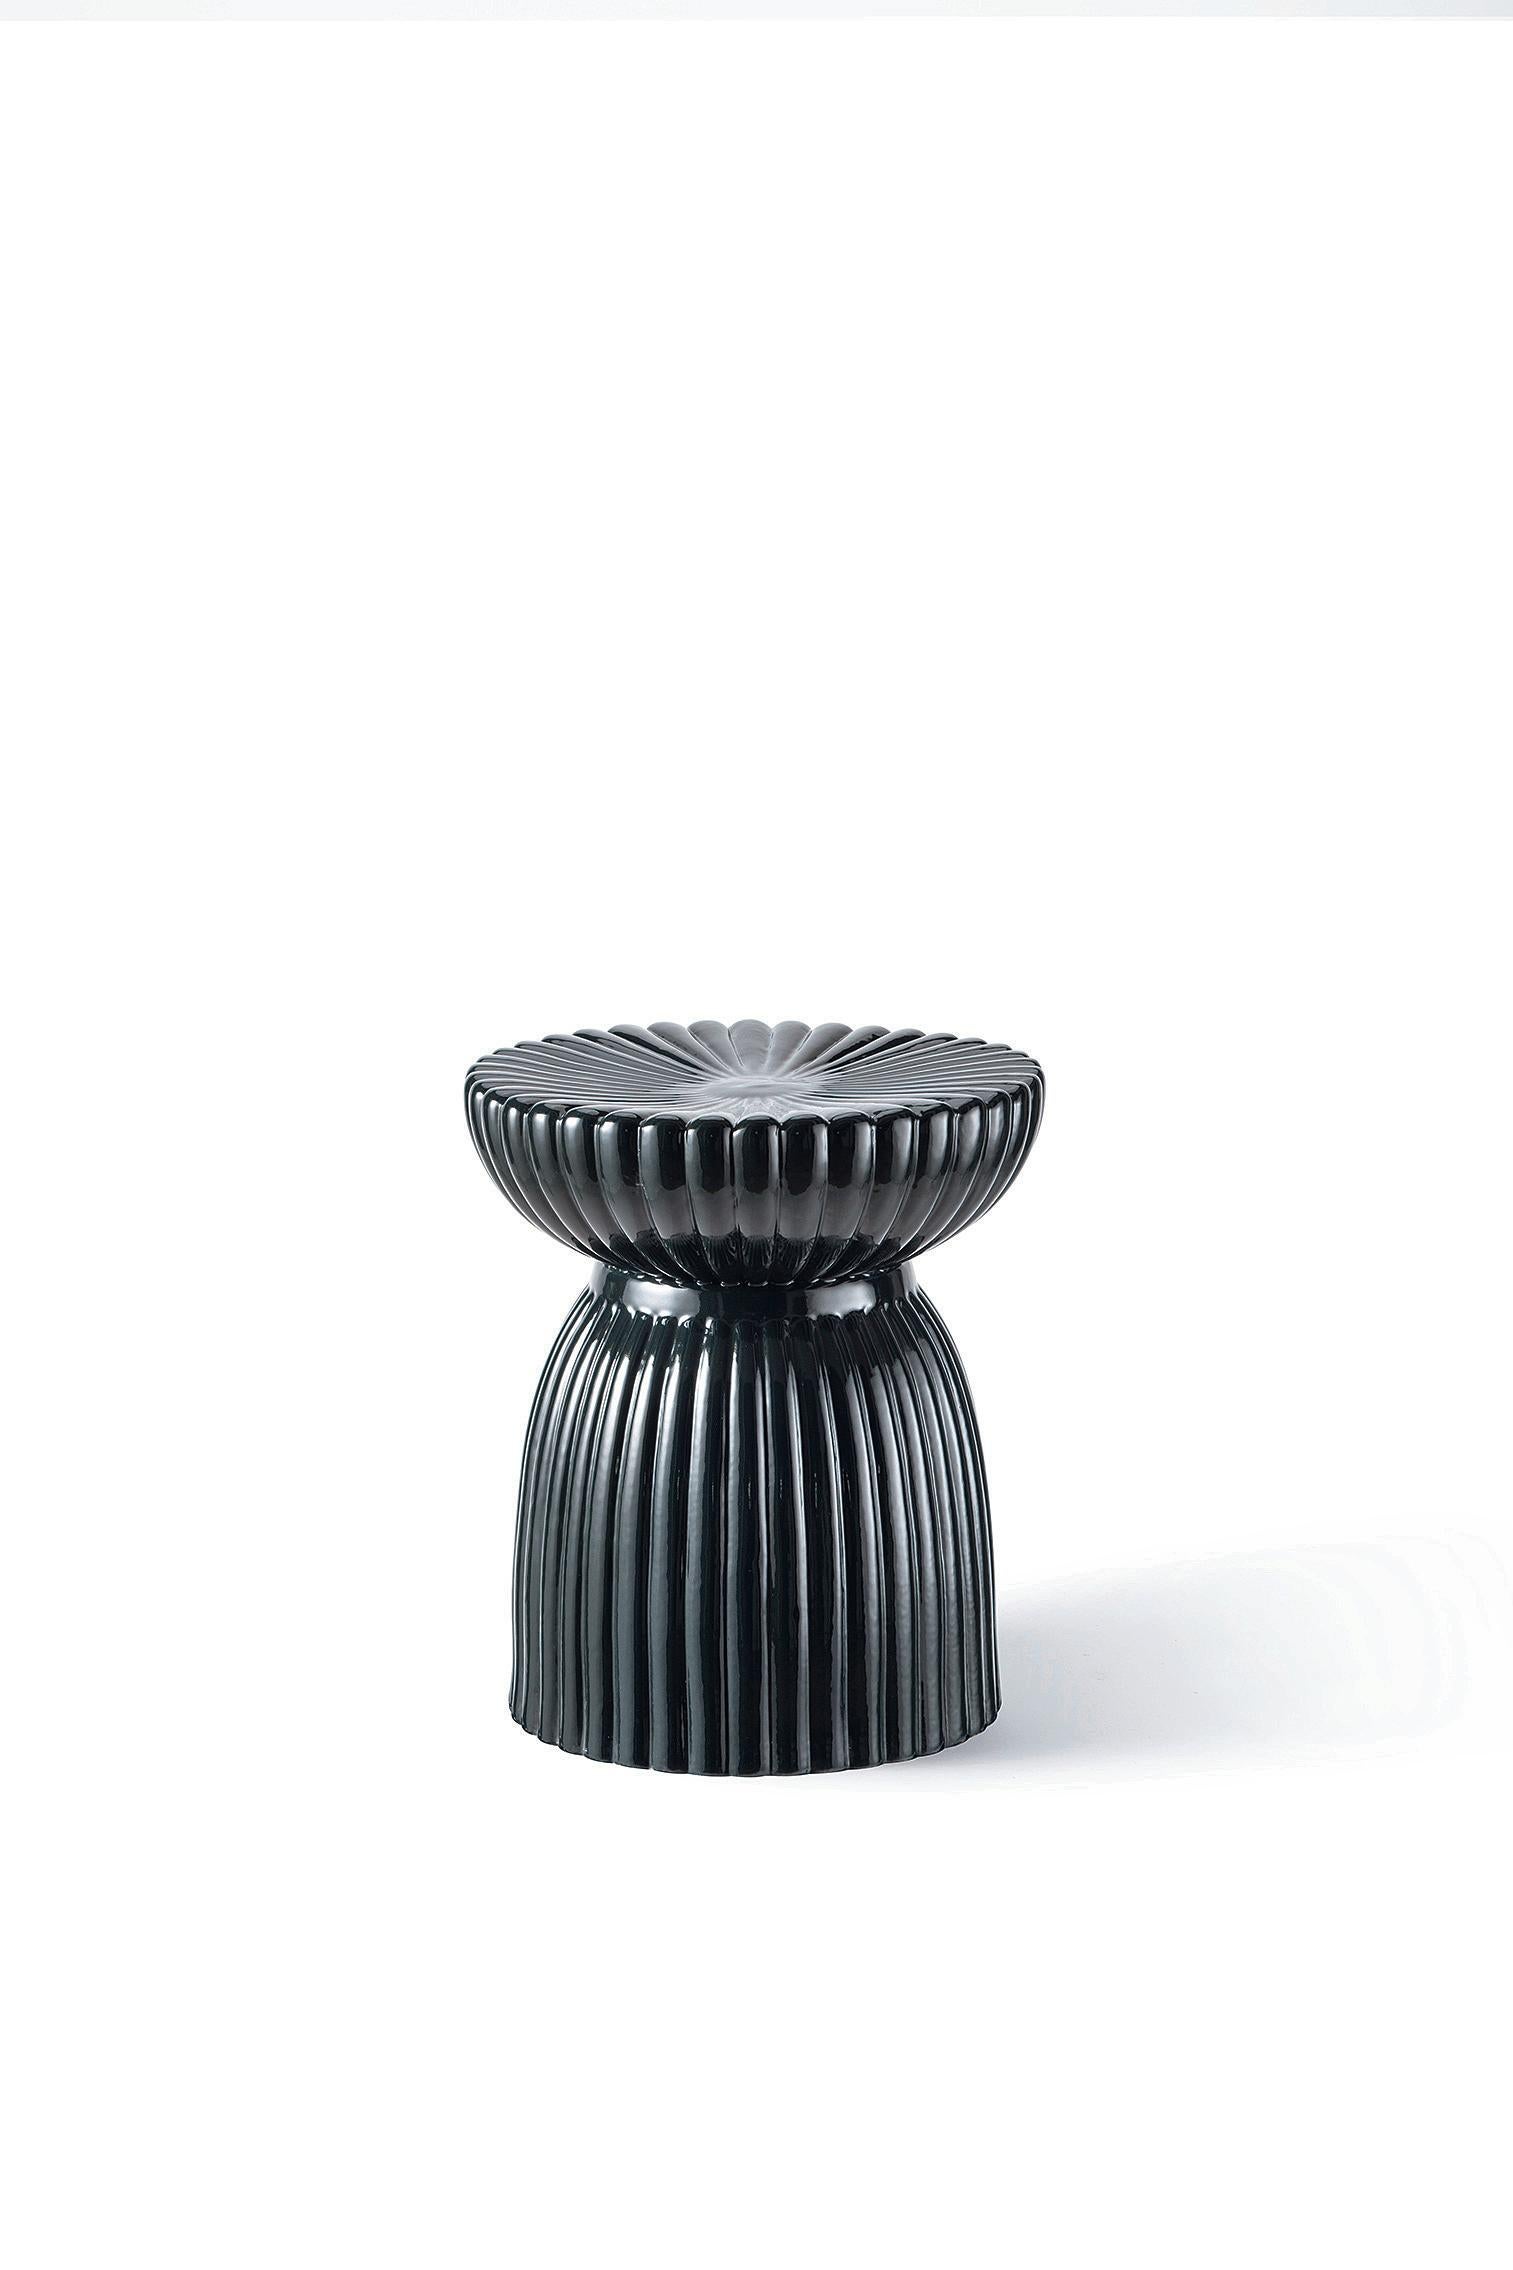 Glossy ceramic stool/gueridon designed by Thomas Dariel, Maison Dada
Measures: Diameter 41.2 x height 45 cm
Ceramic in glossy black, blue or pink glaze finish
The name of this piece has been chosen as a nod to Guy de Maupassant’s famous character